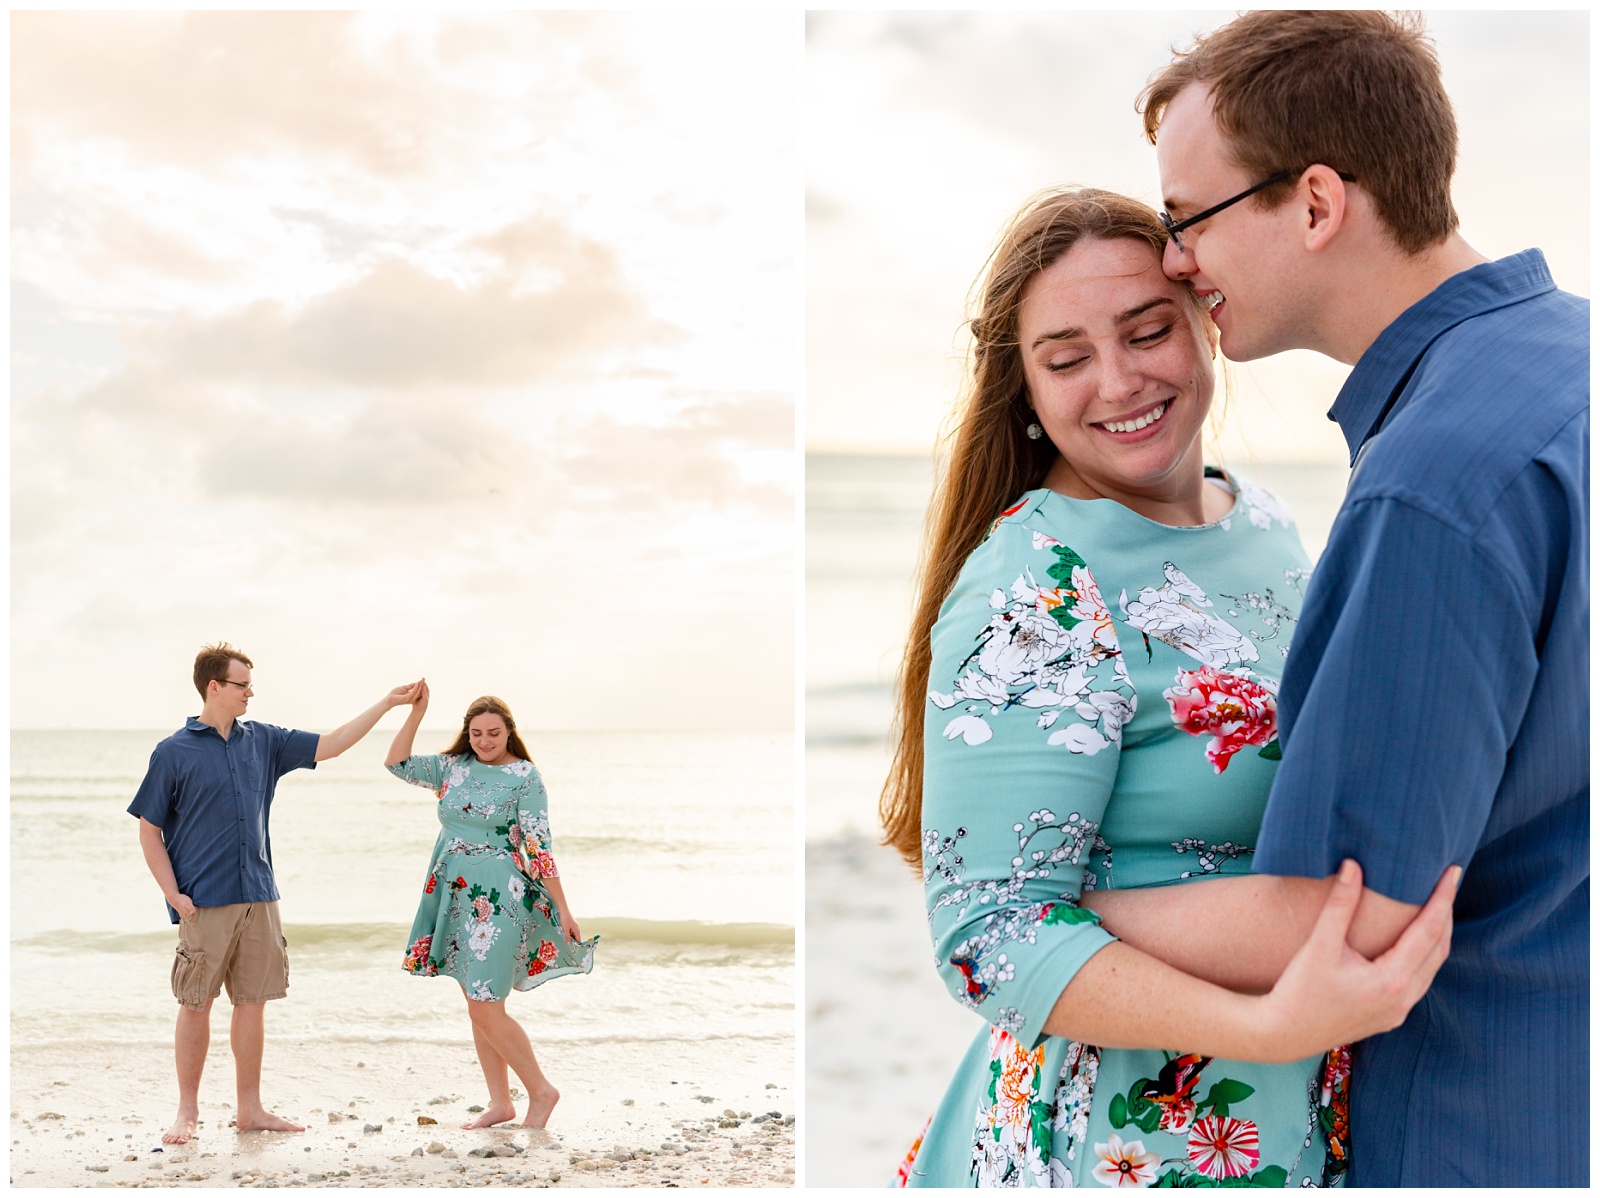 Left photo of engaged couple standing on the beach as she twirls on her blue flowery dress and right photo of guy kissing fiancé on the temple as she giggles at Honeymoon Island, Dunedin Florida.